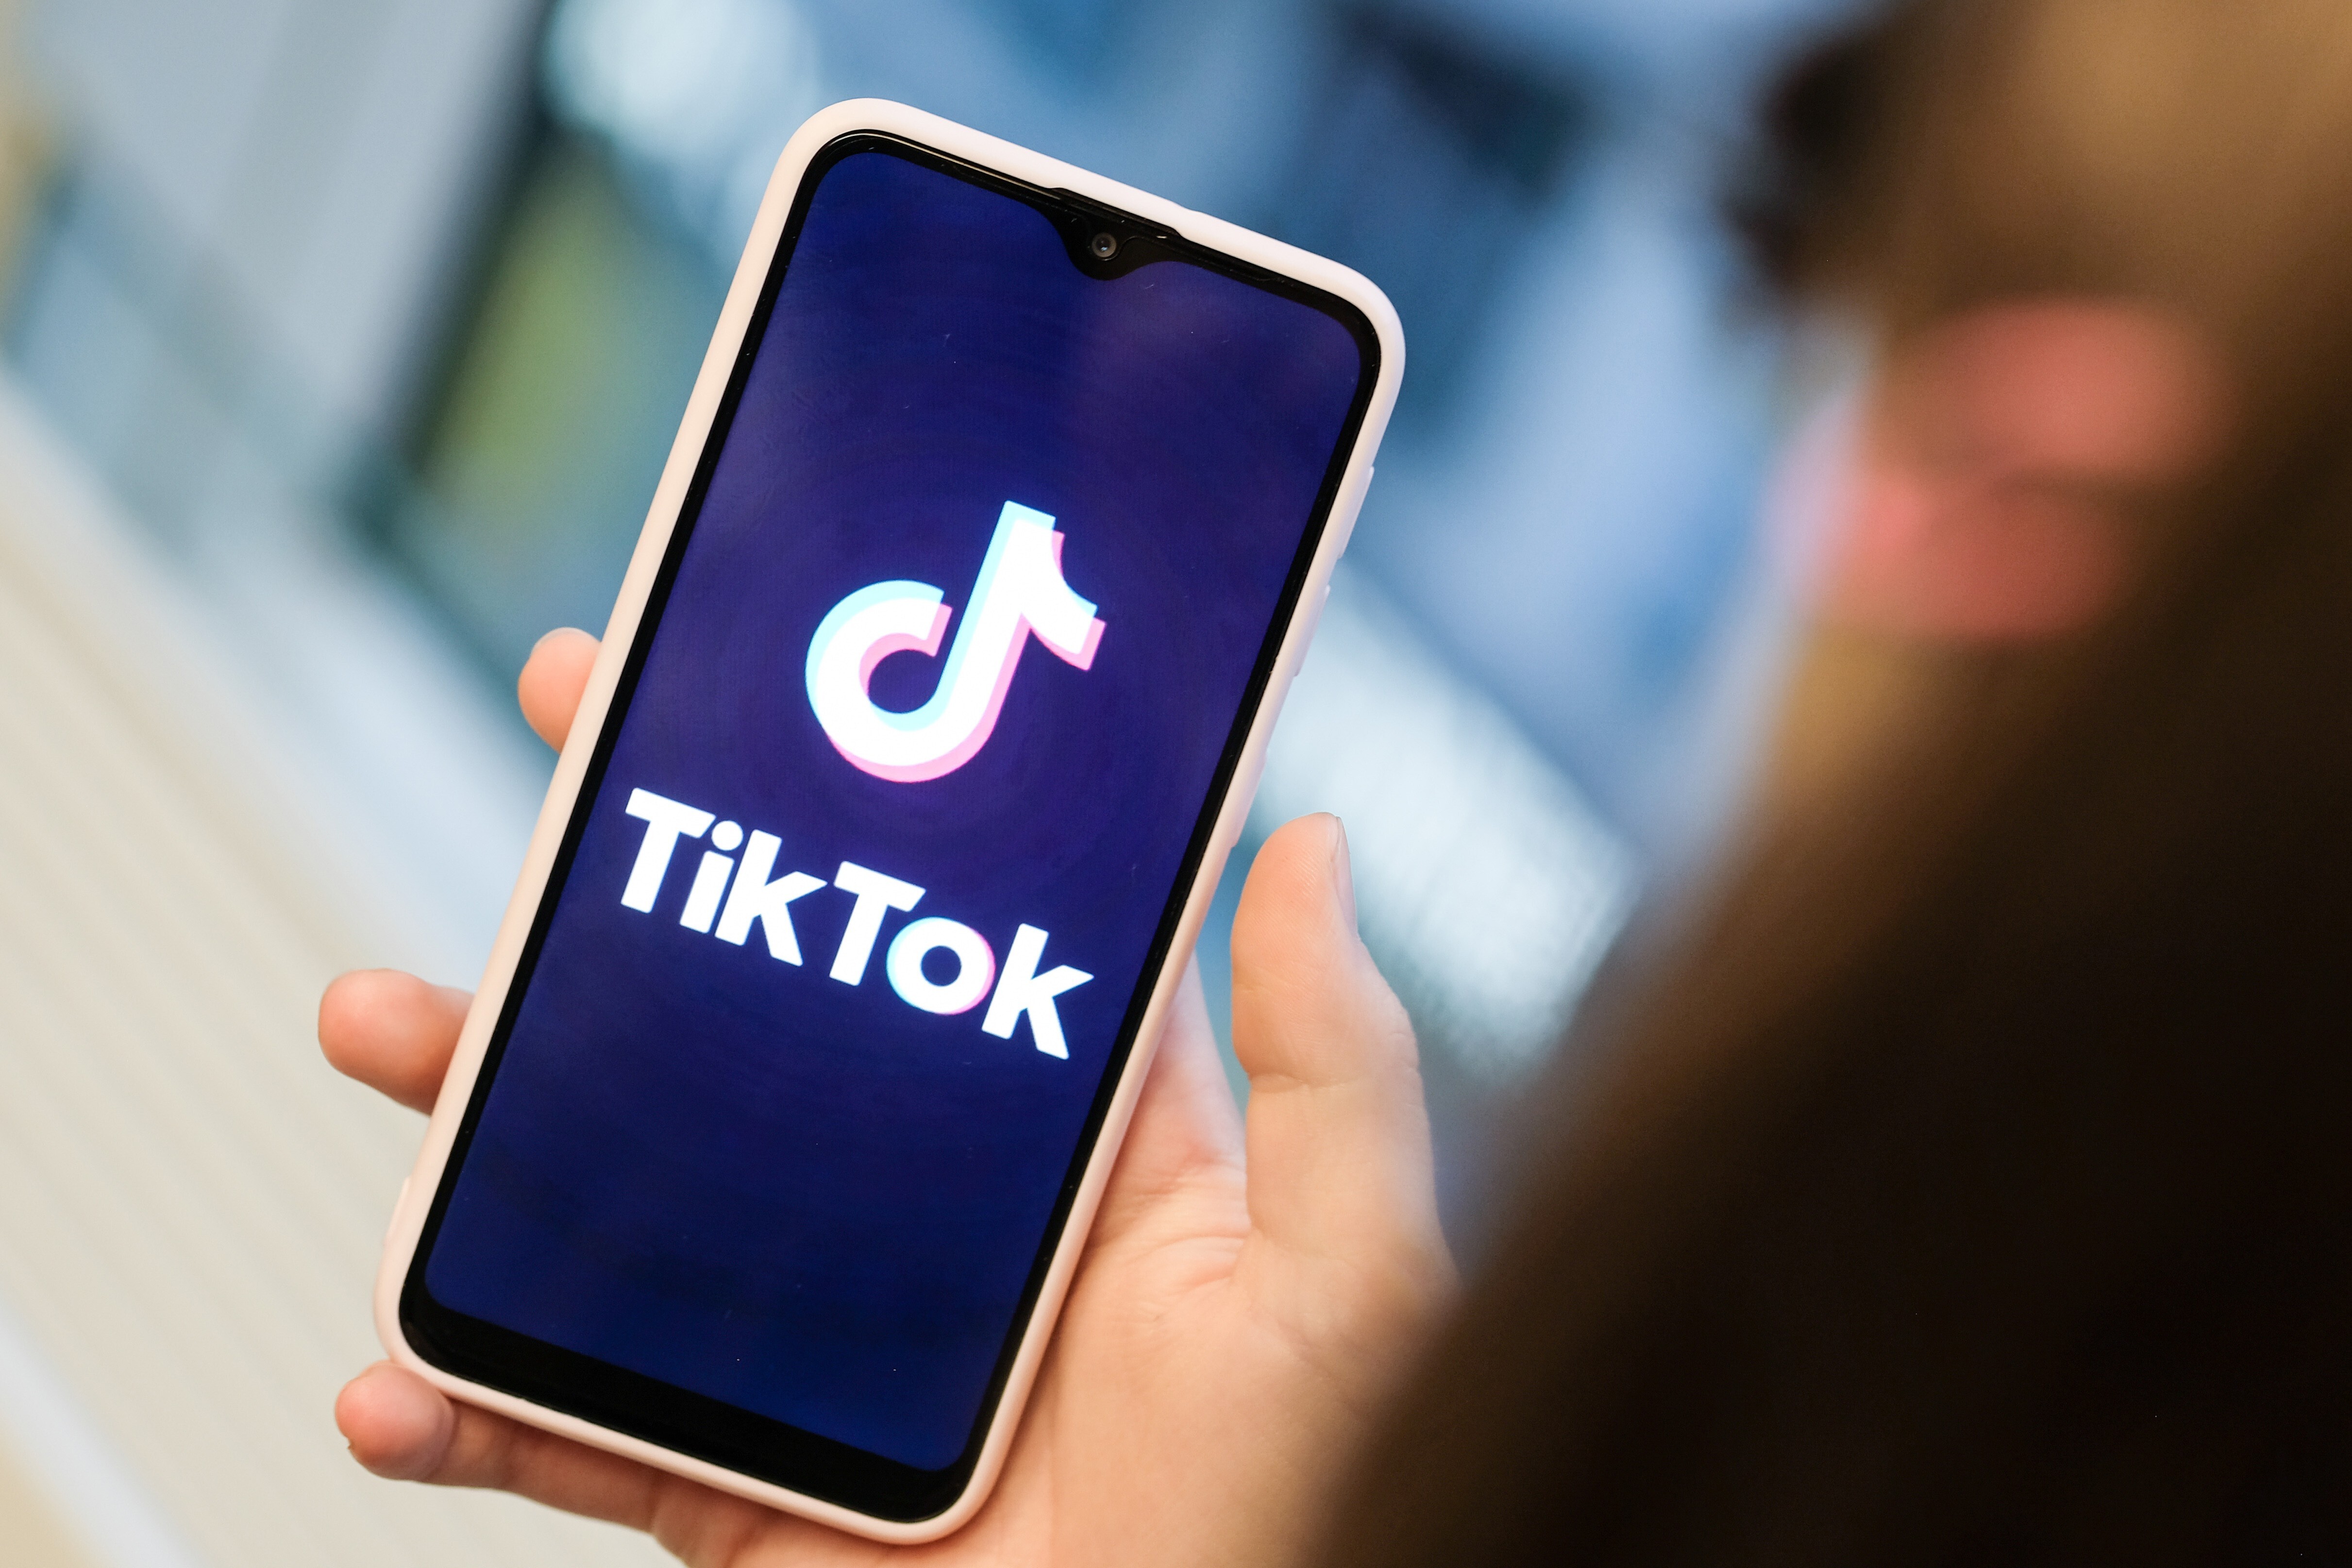 Police in Bangladesh have arrested suspected members of a sex trafficking gang that used video-sharing app TikTok to lure young women and girls before selling them for sex in neighbouring India. Photo: dpa